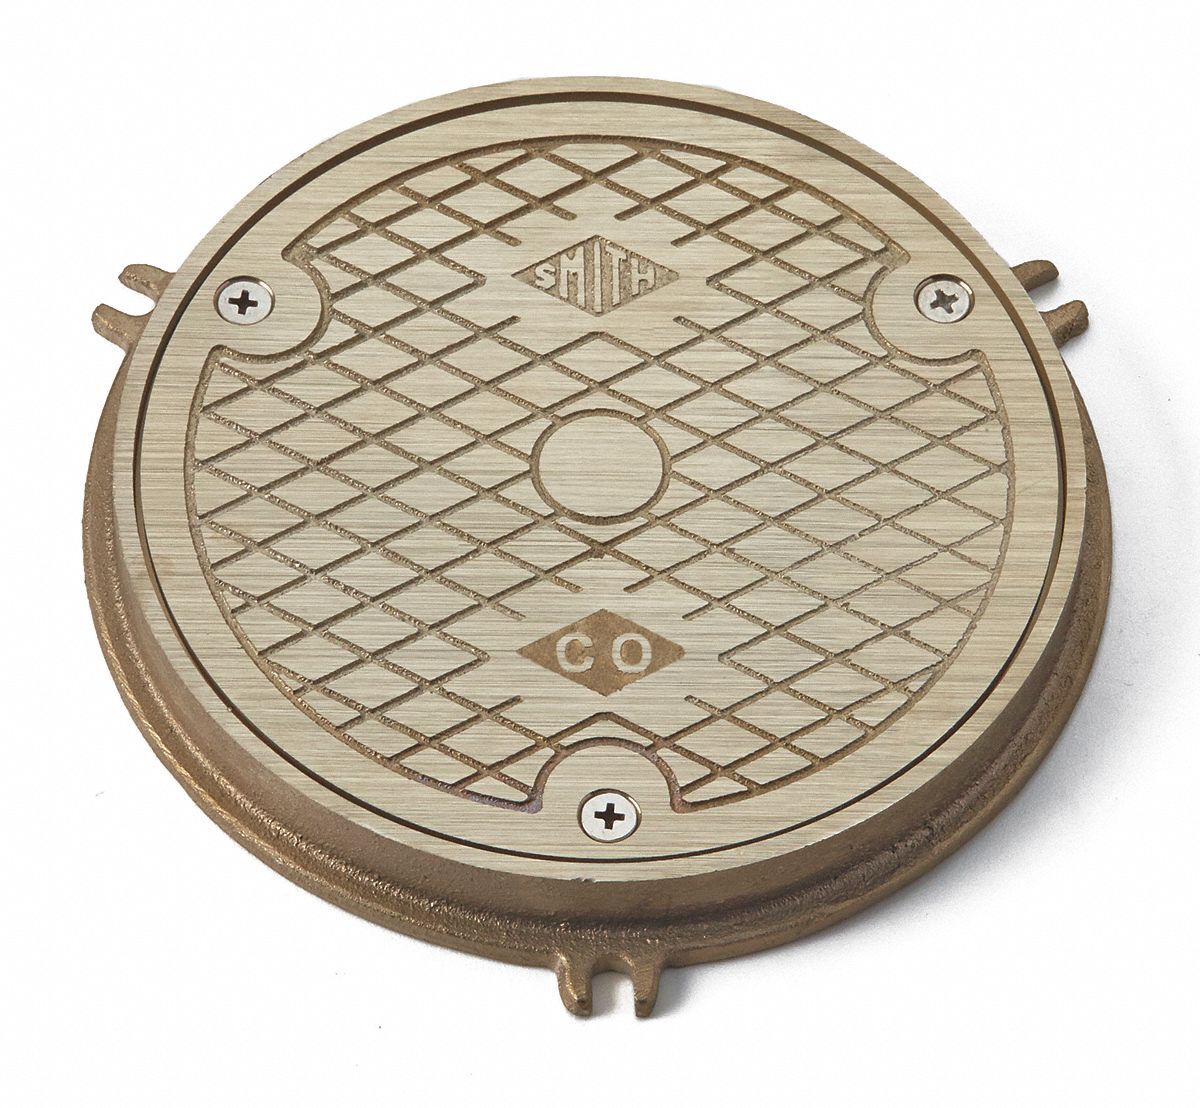 Jay R Smith Mfg Co Cleanouts For Use With Floor Drain Cleanouts